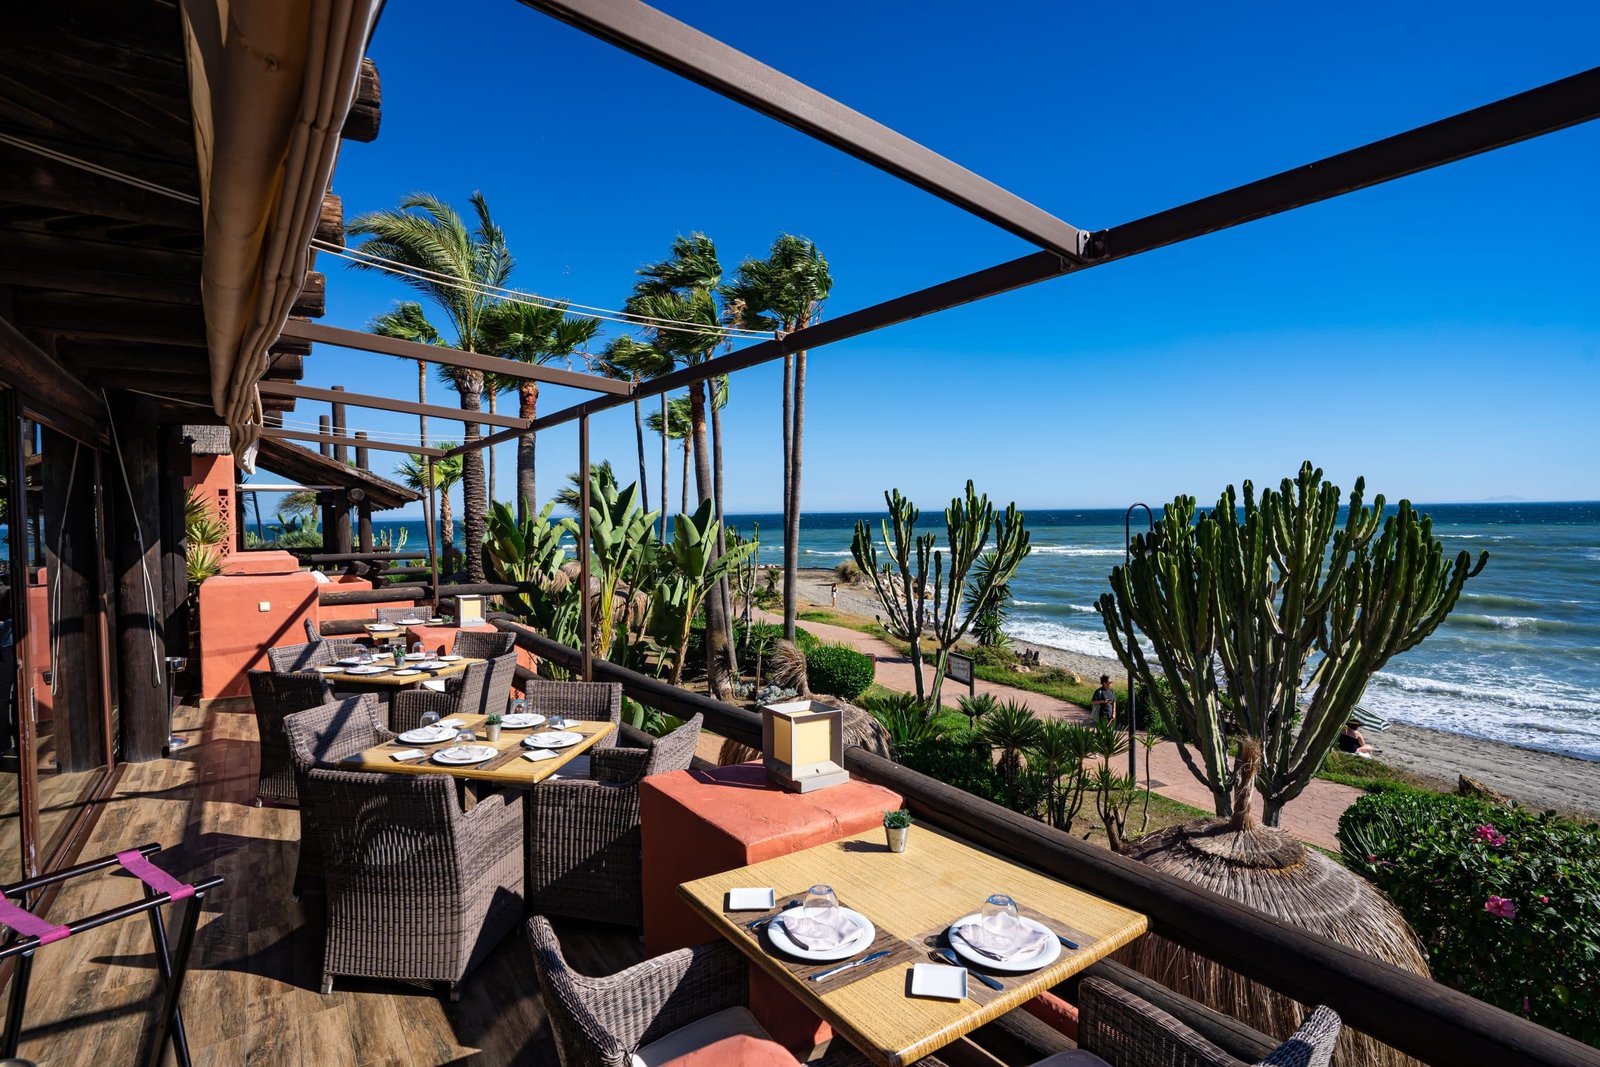 Top Cozy Restaurants to Visit in Marbella and Surrounding Areas - als04356 scaled 2 - Tourism - Restaurants to Visit in Marbella